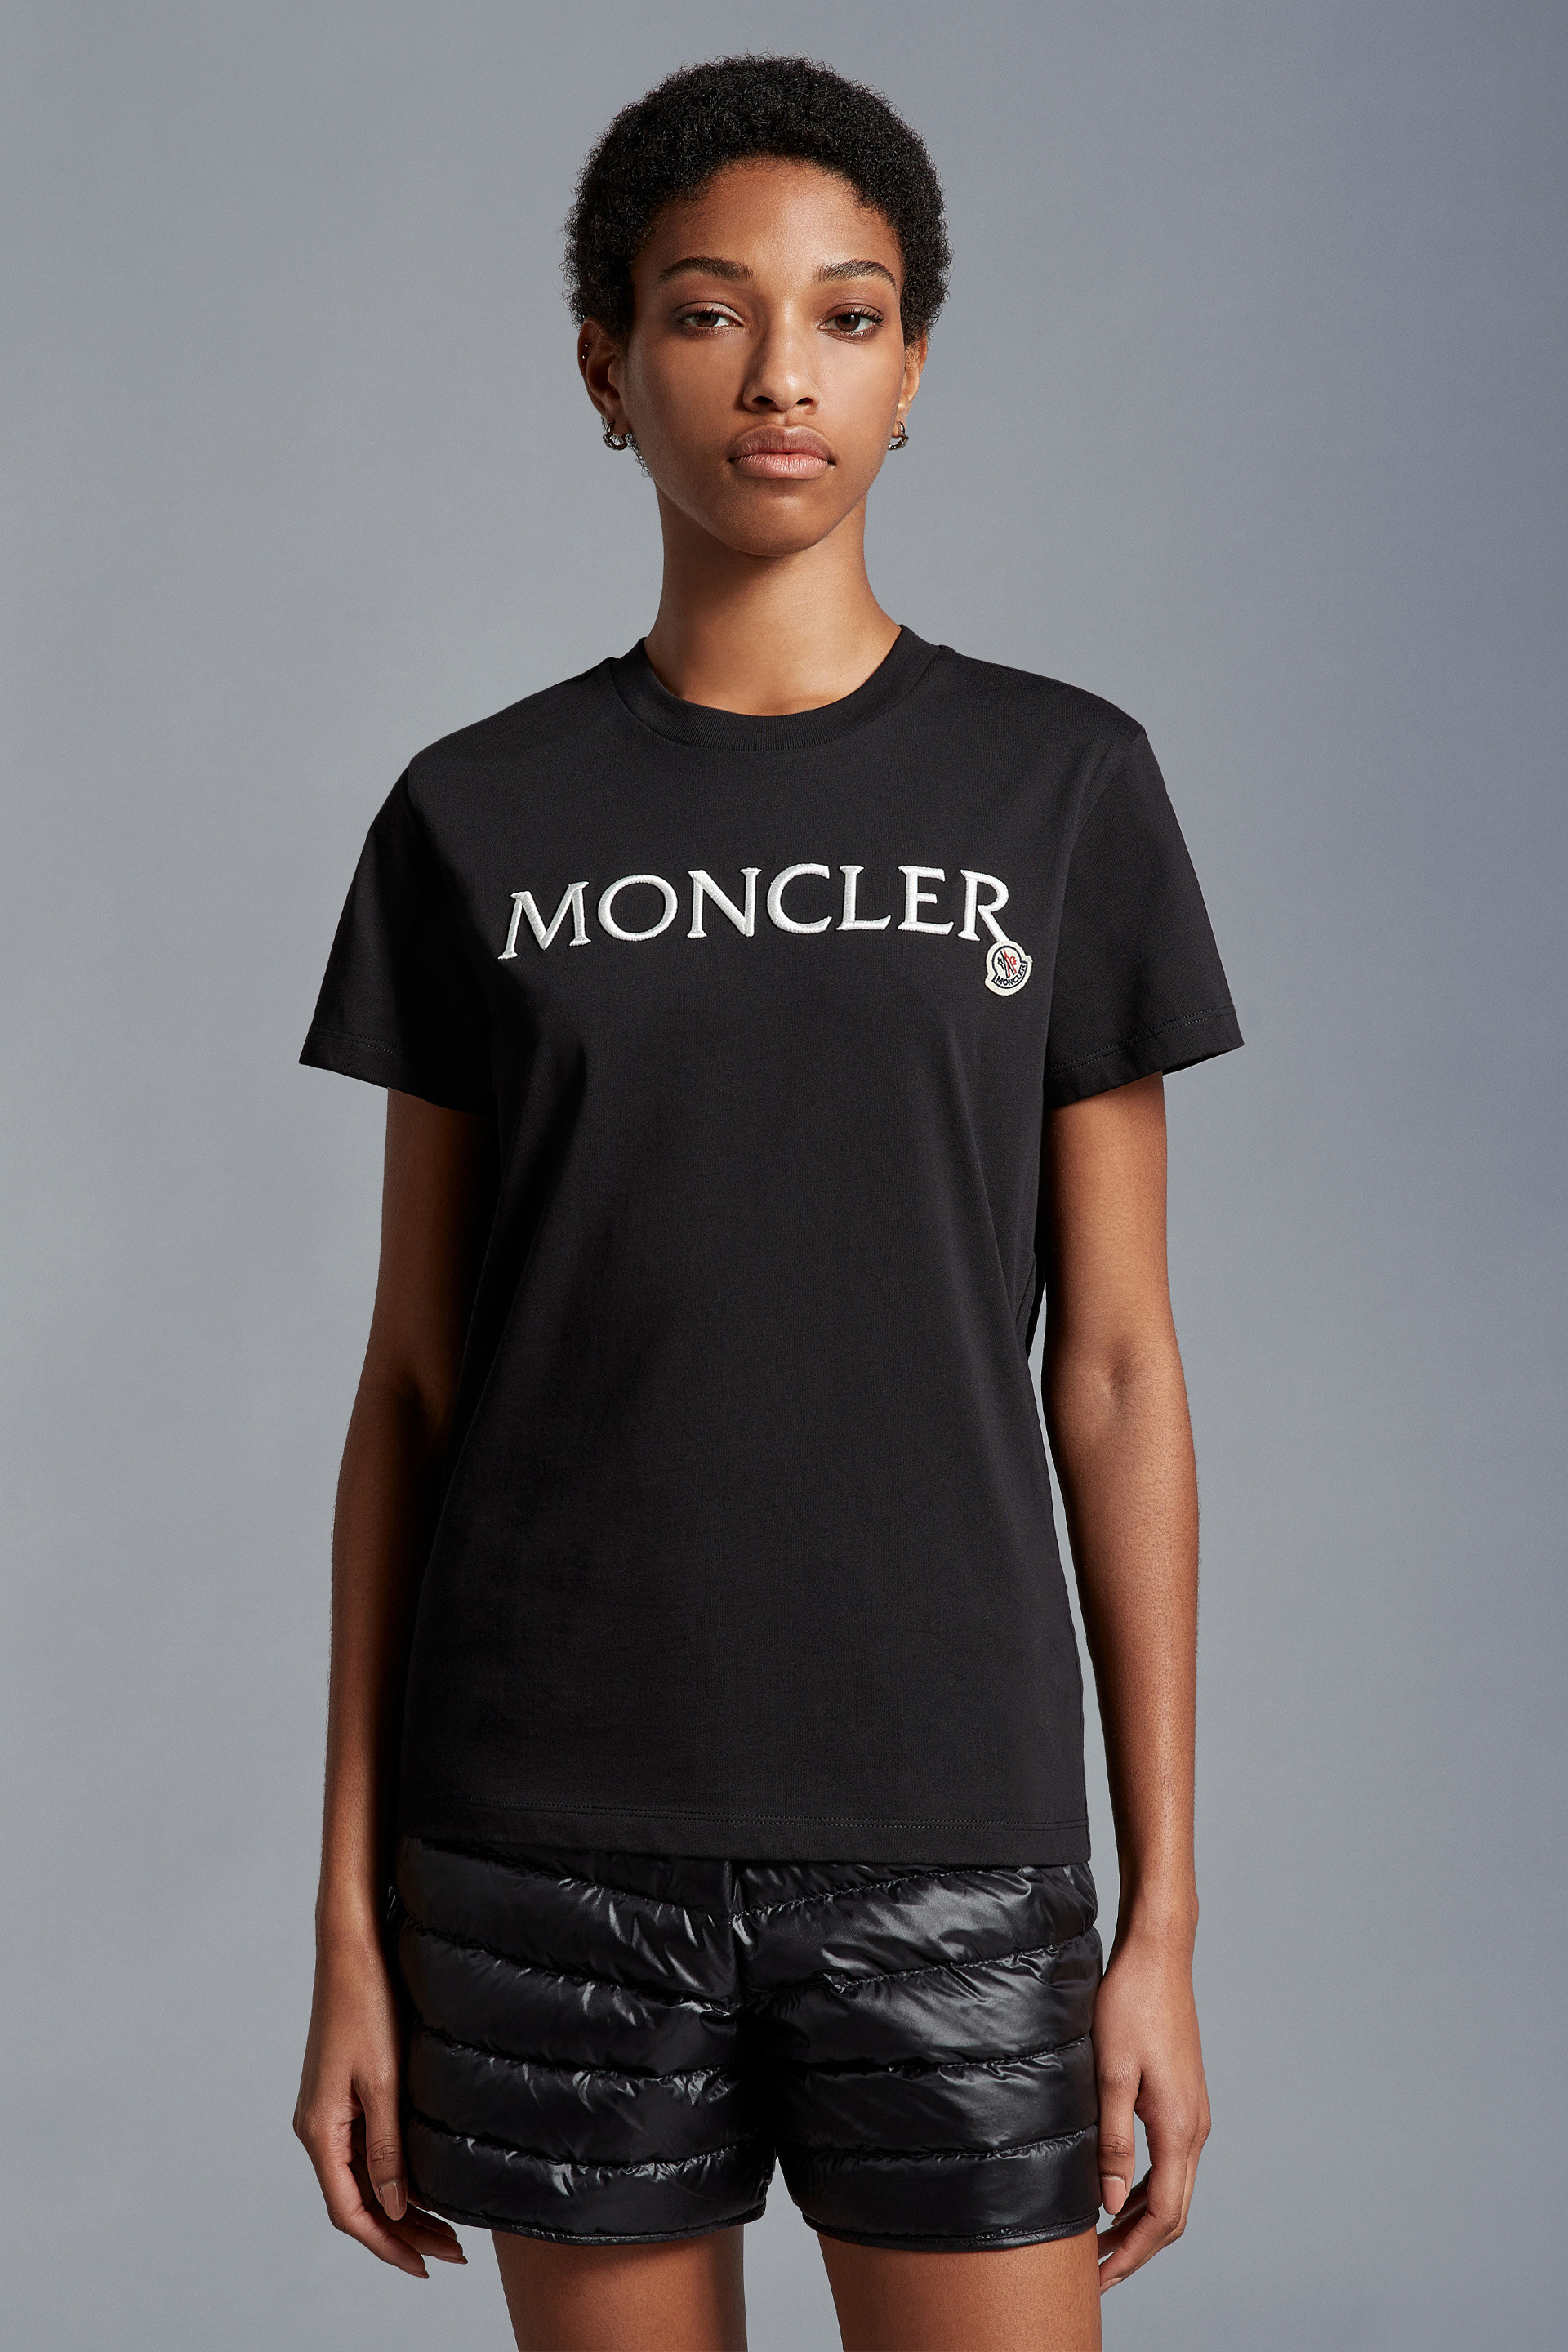 Tops for Women - T-Shirts, & Polos | Moncler US